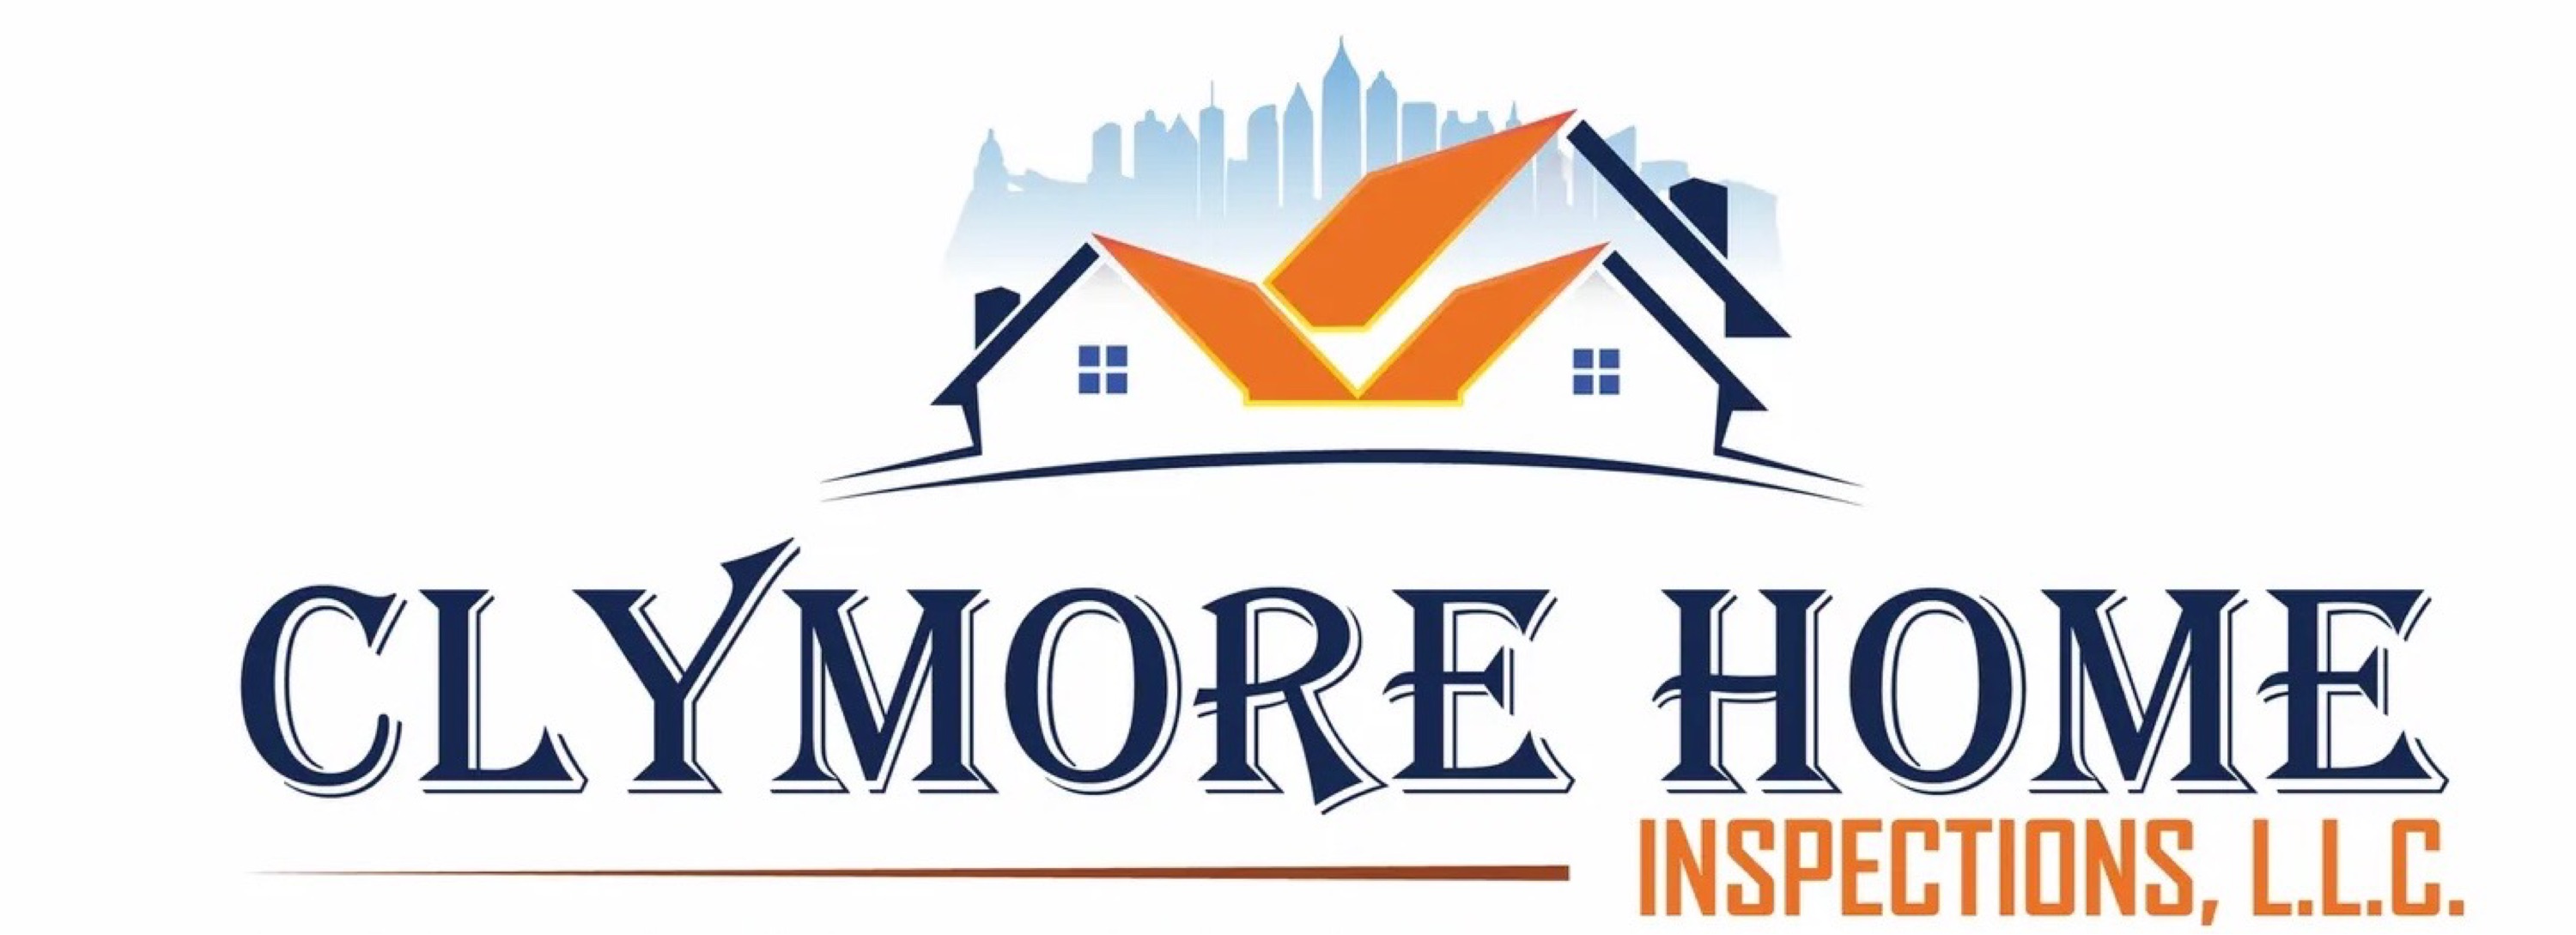 Clymore Home Inspections Logo